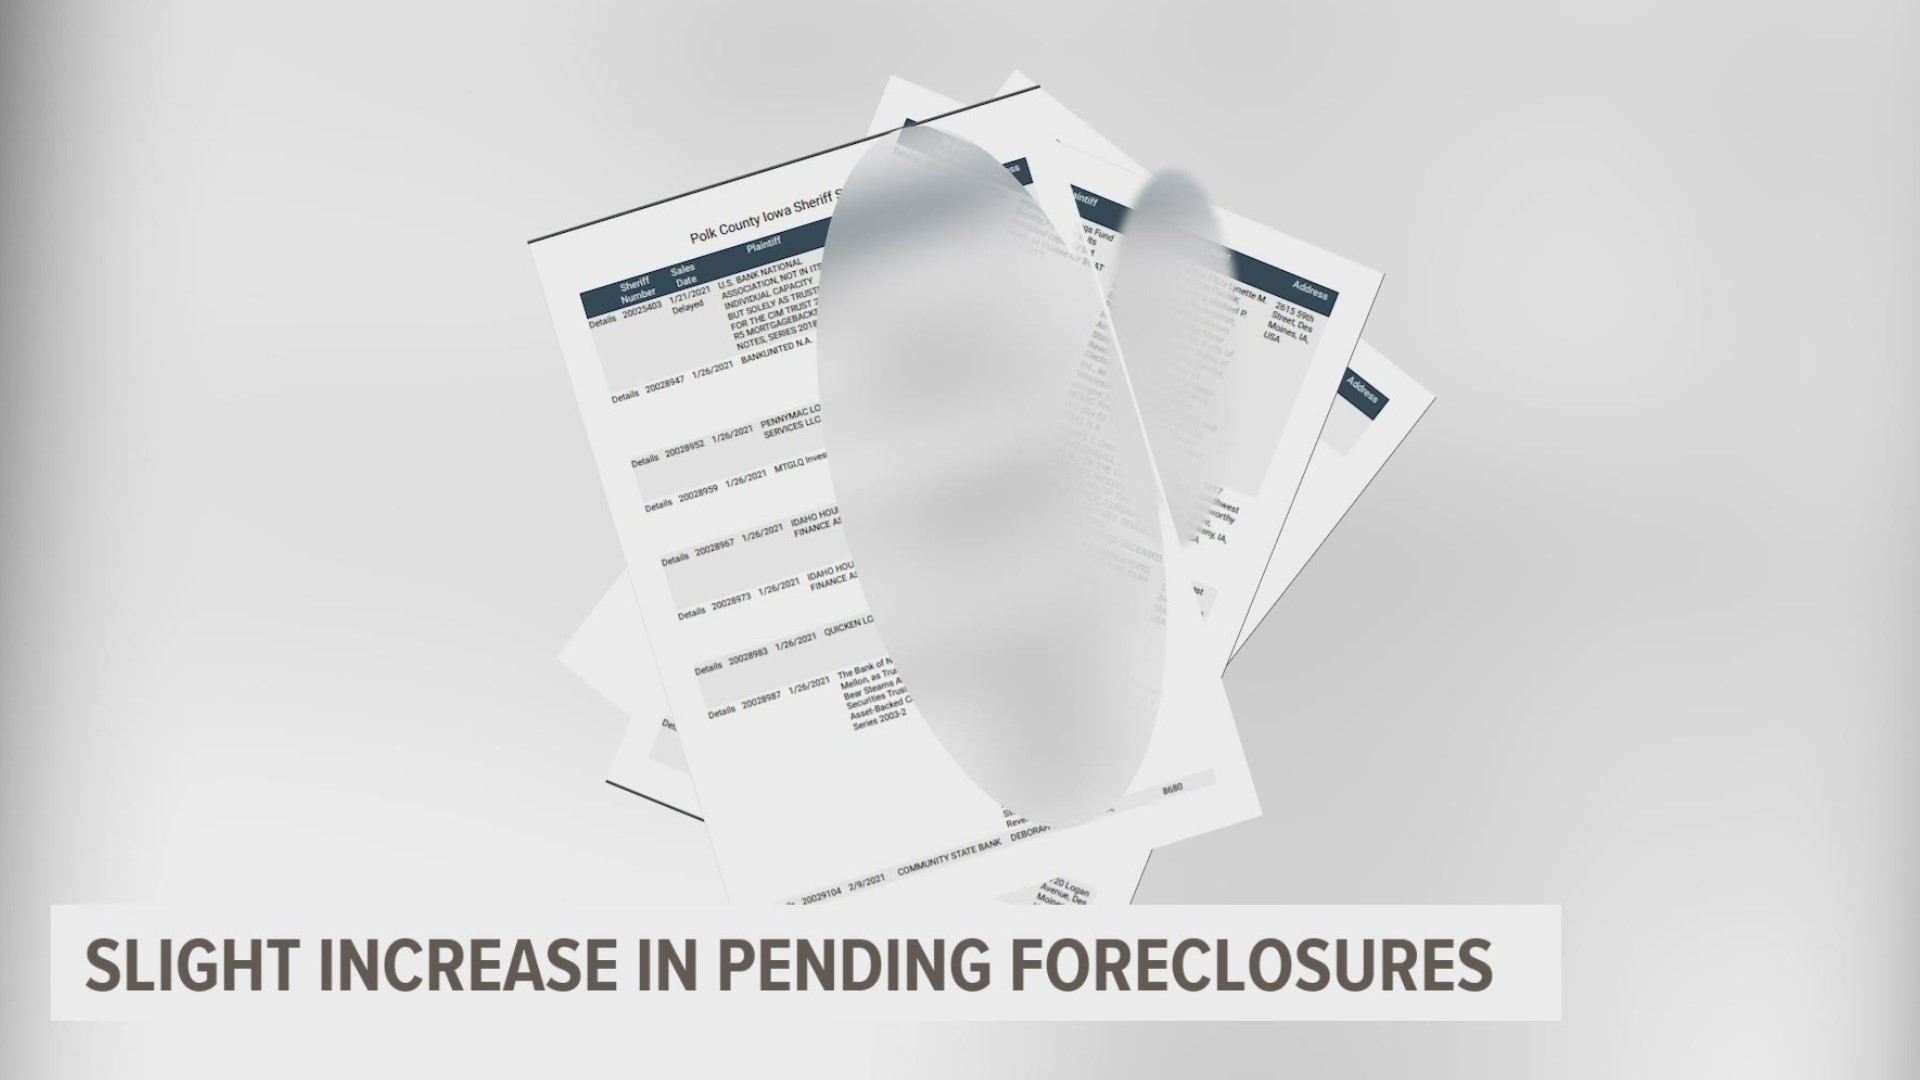 Attorney Sam Marks said he's seen a ten to twenty percent increase in pending foreclosures come across his desk recently.